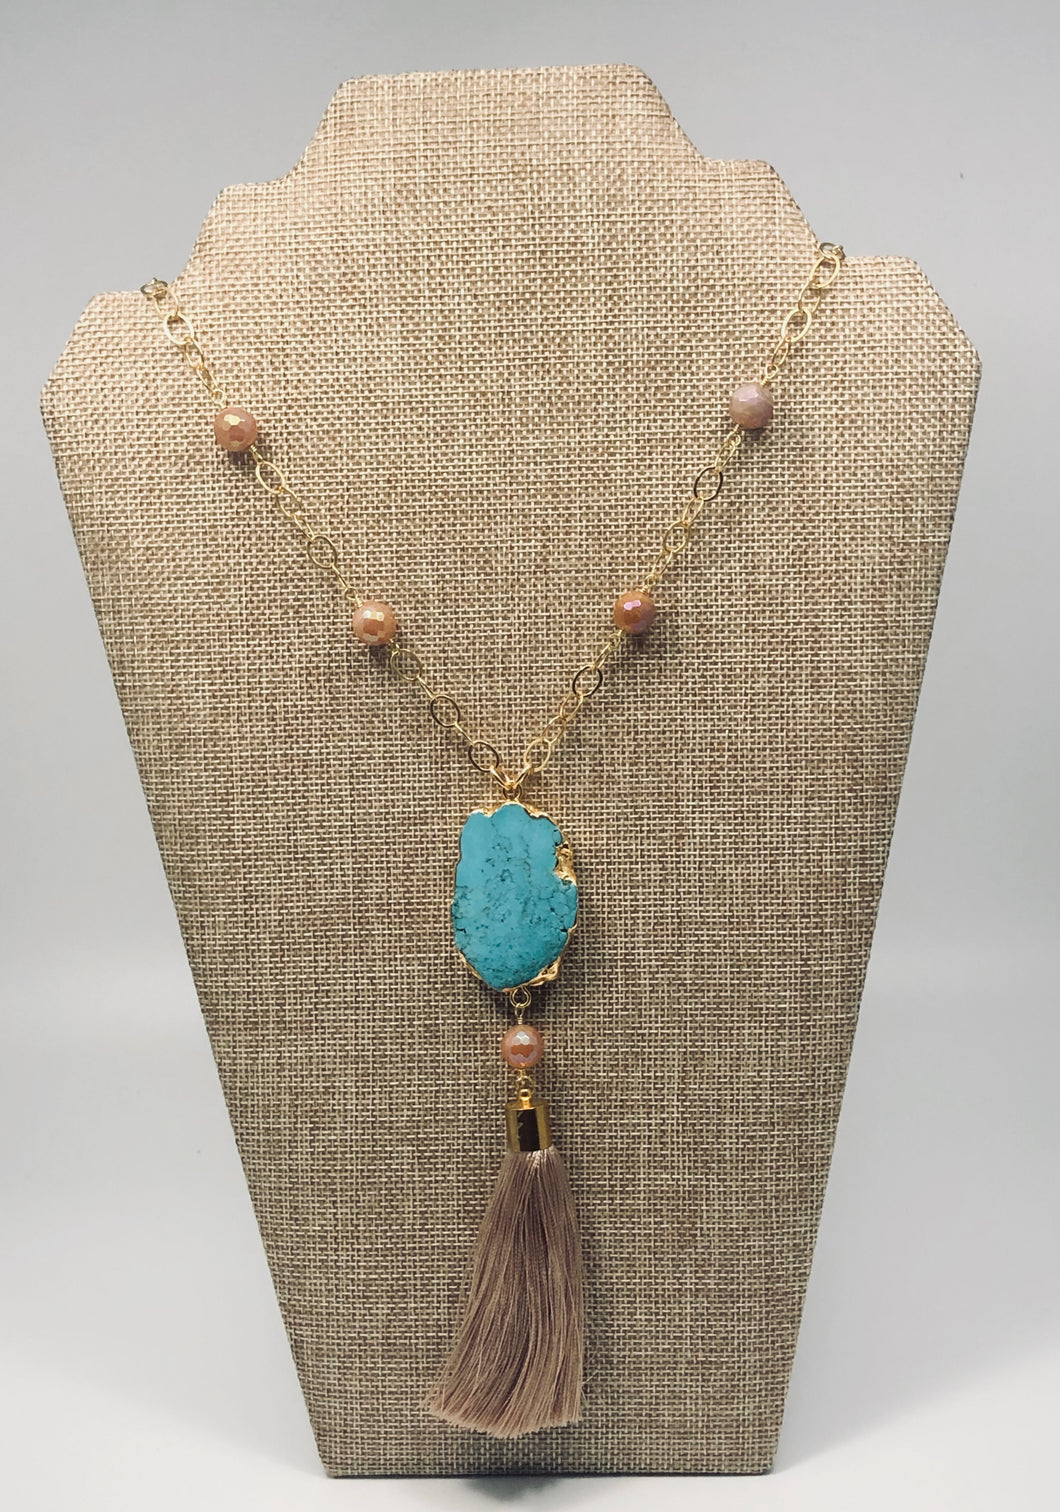 Moonstone, turquoise, gold necklace